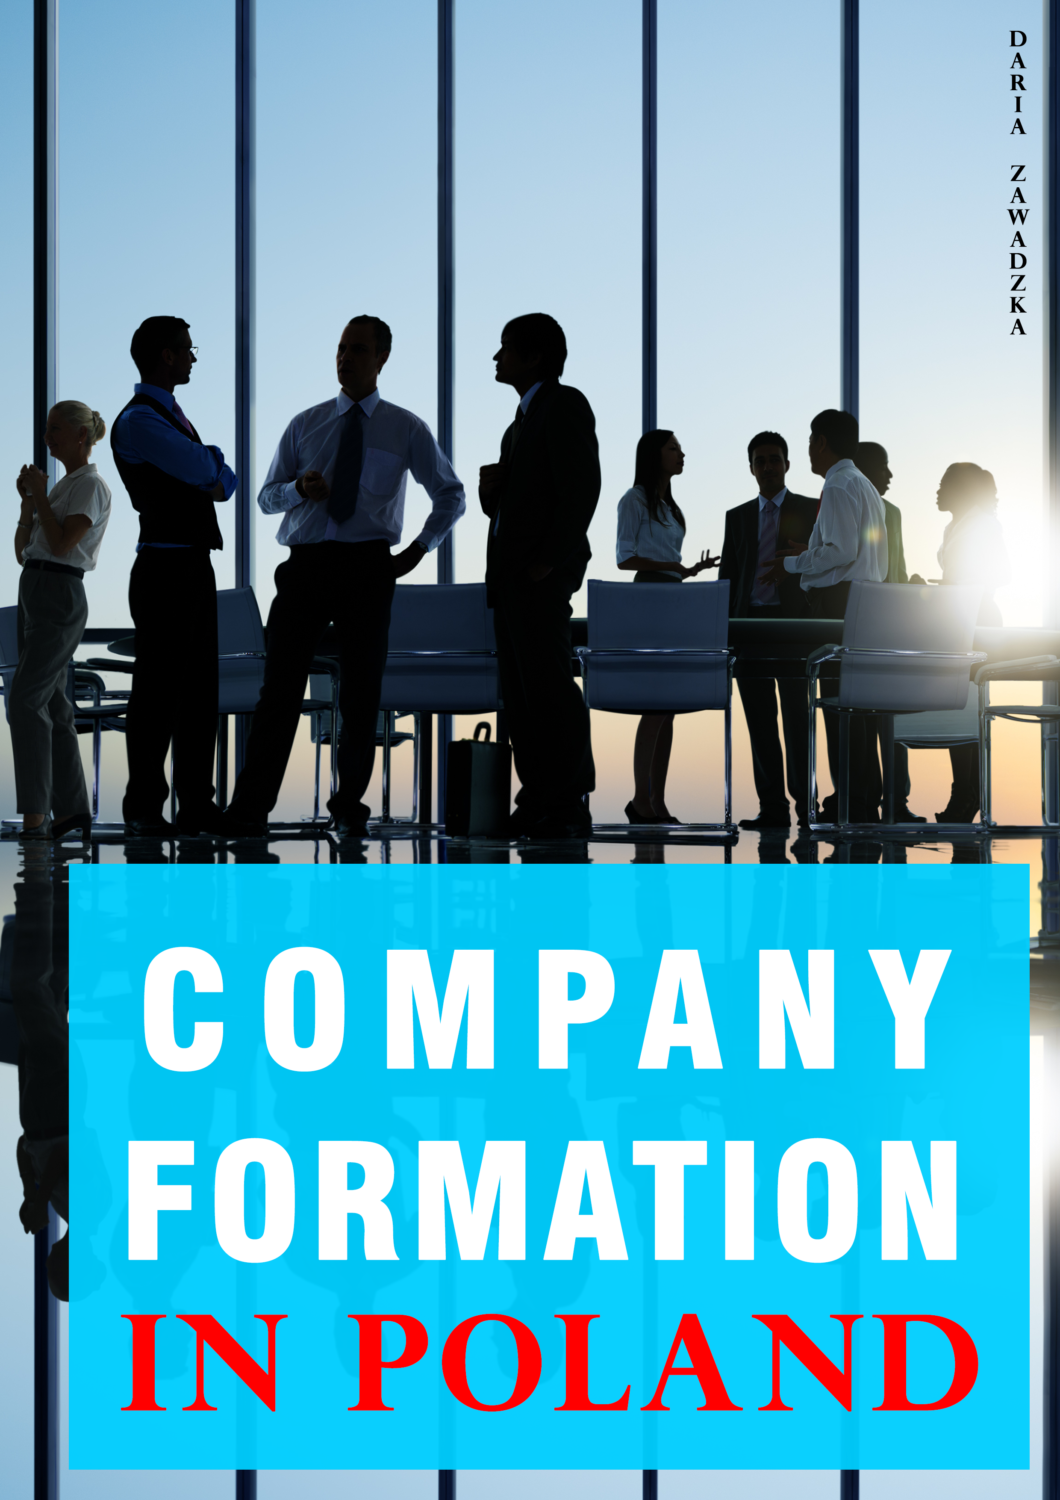 Ebook for foreigners about company formation in Poland, legal rules, types of companies, limited liability company.